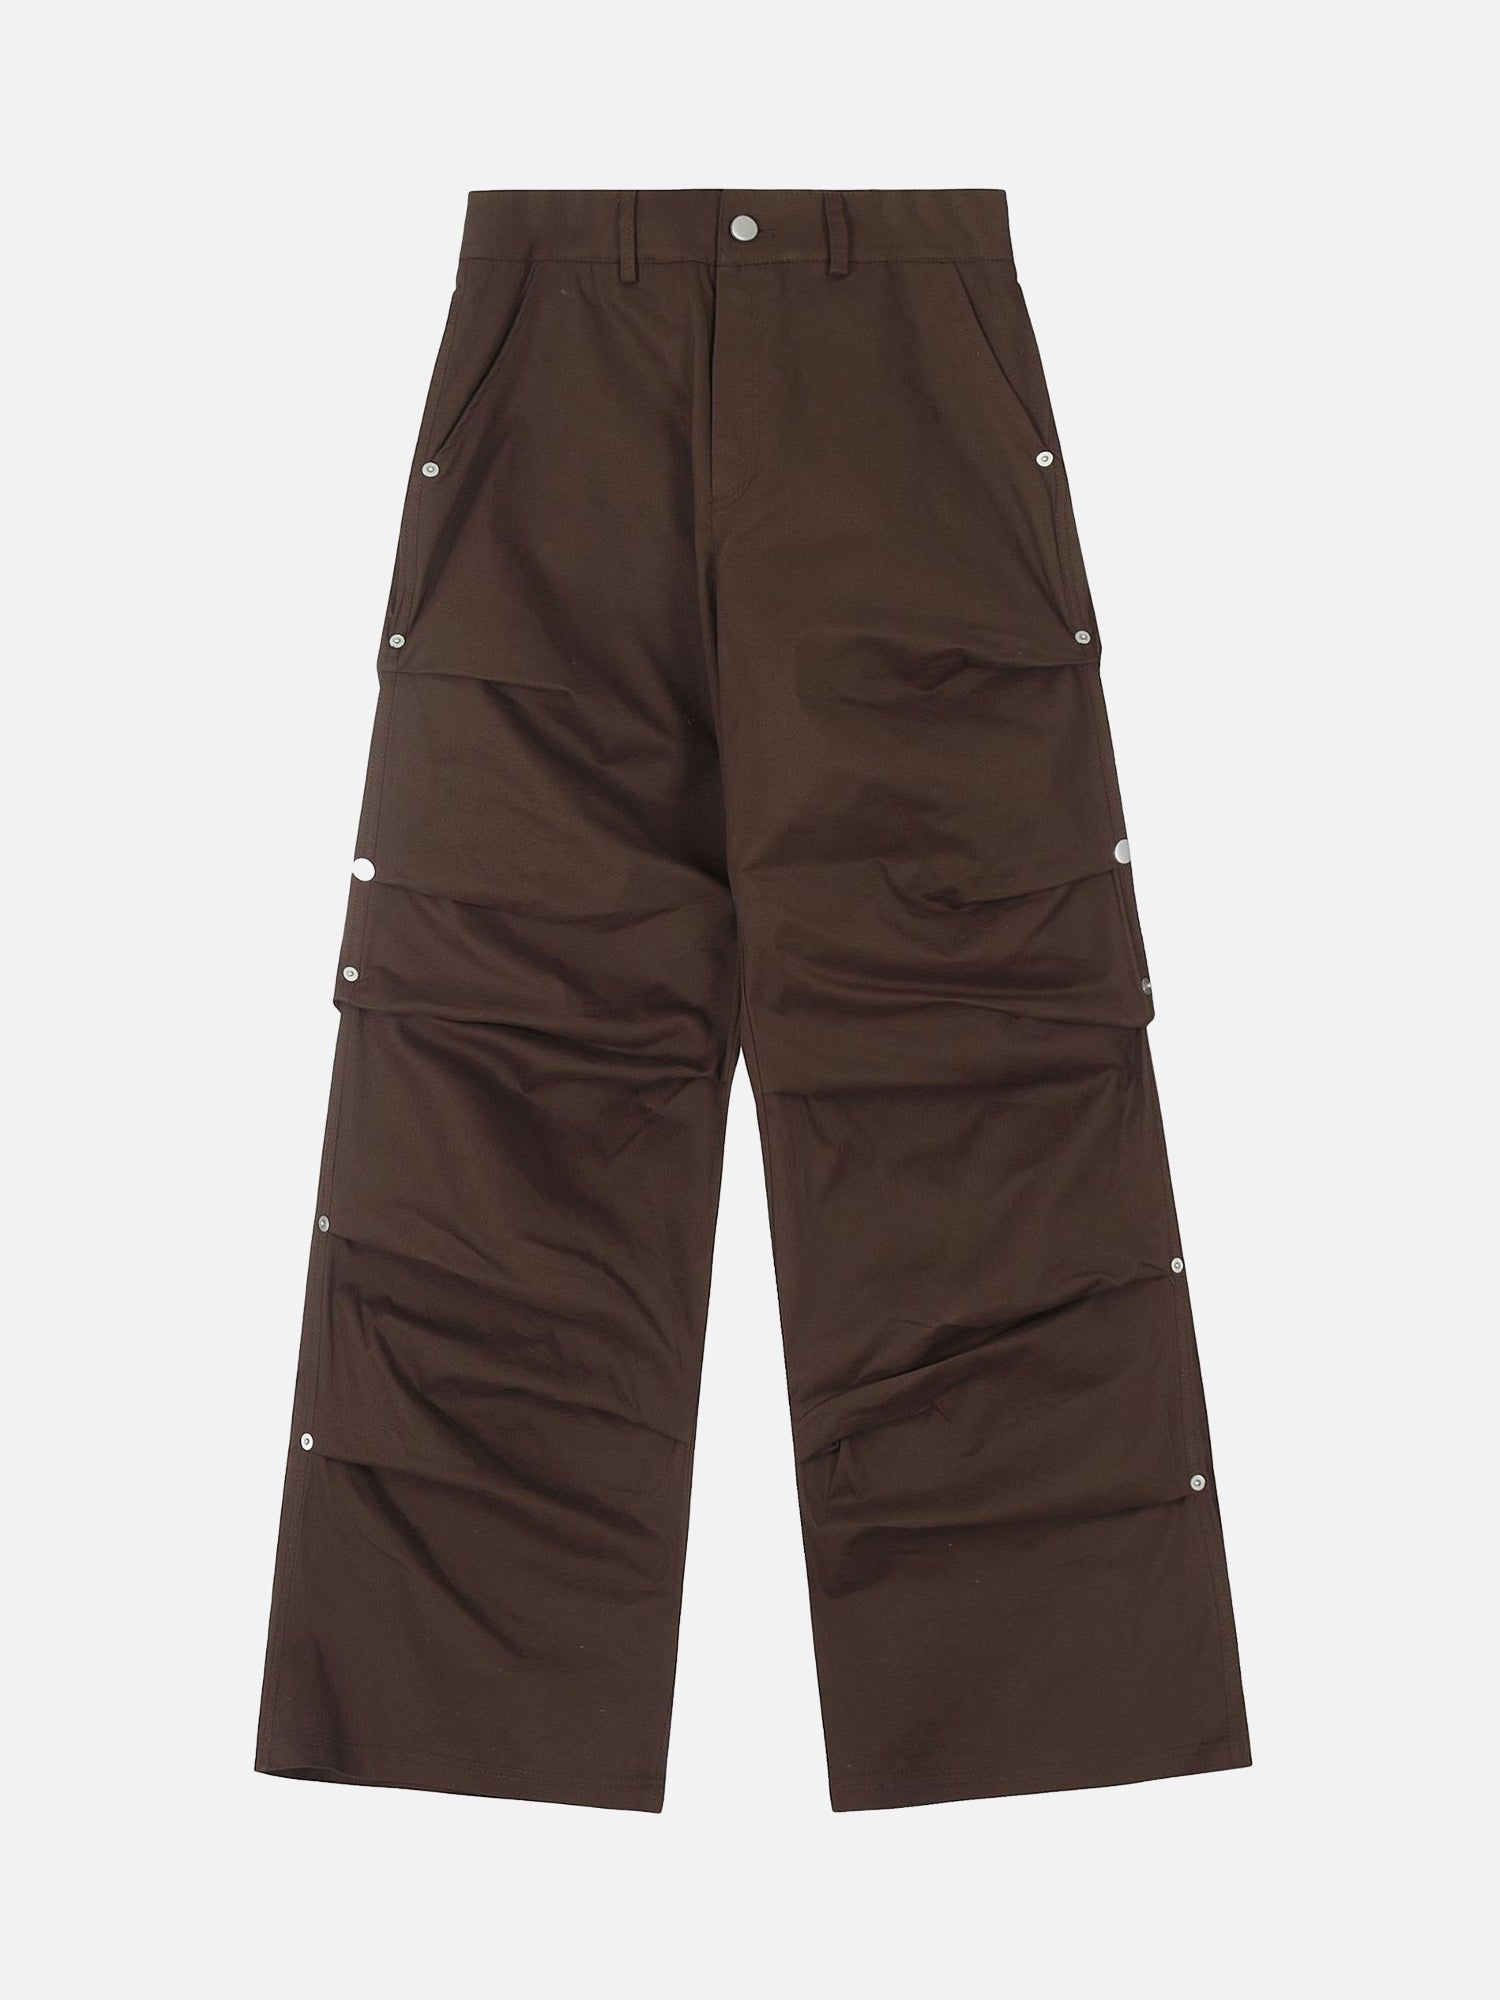 Thesupermade American Street Trend Pleated Versatile Casual Pants